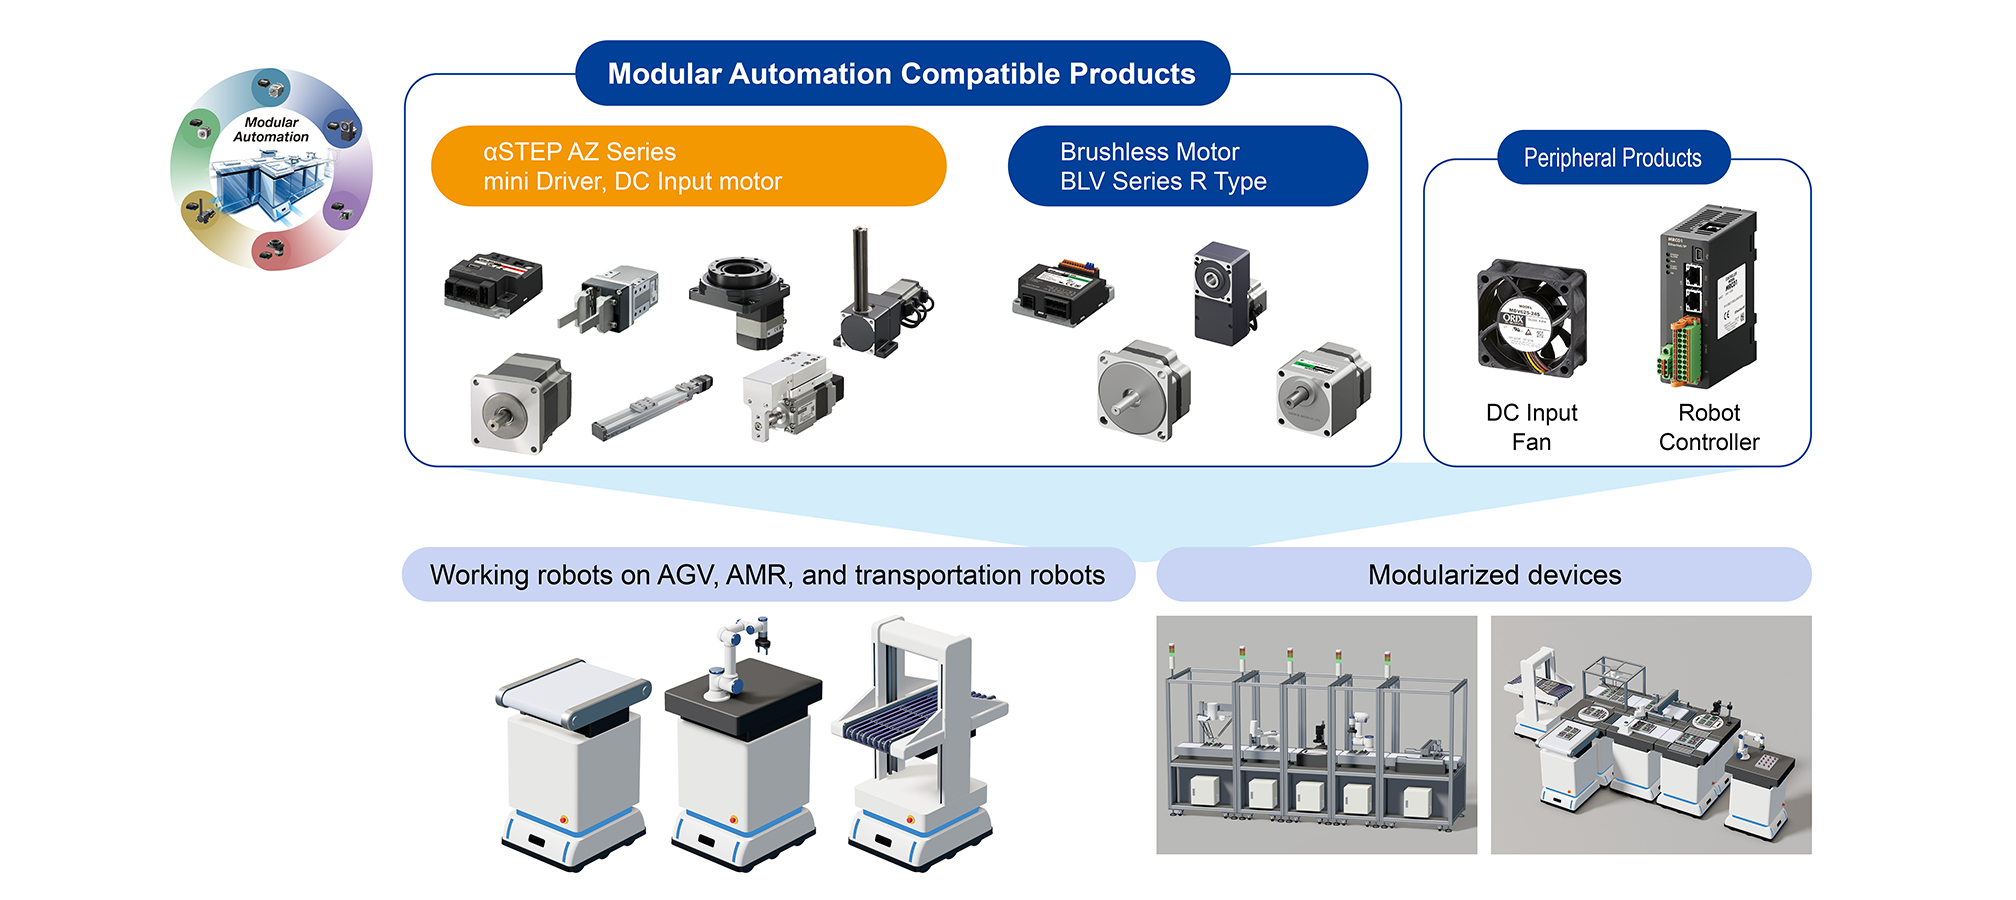 Robot controller MRC01 connection diagram and selectable robot types (vertical articulated types | horizontal articulated (SCARA) types | gantry types | ORIM VEXTA robots)